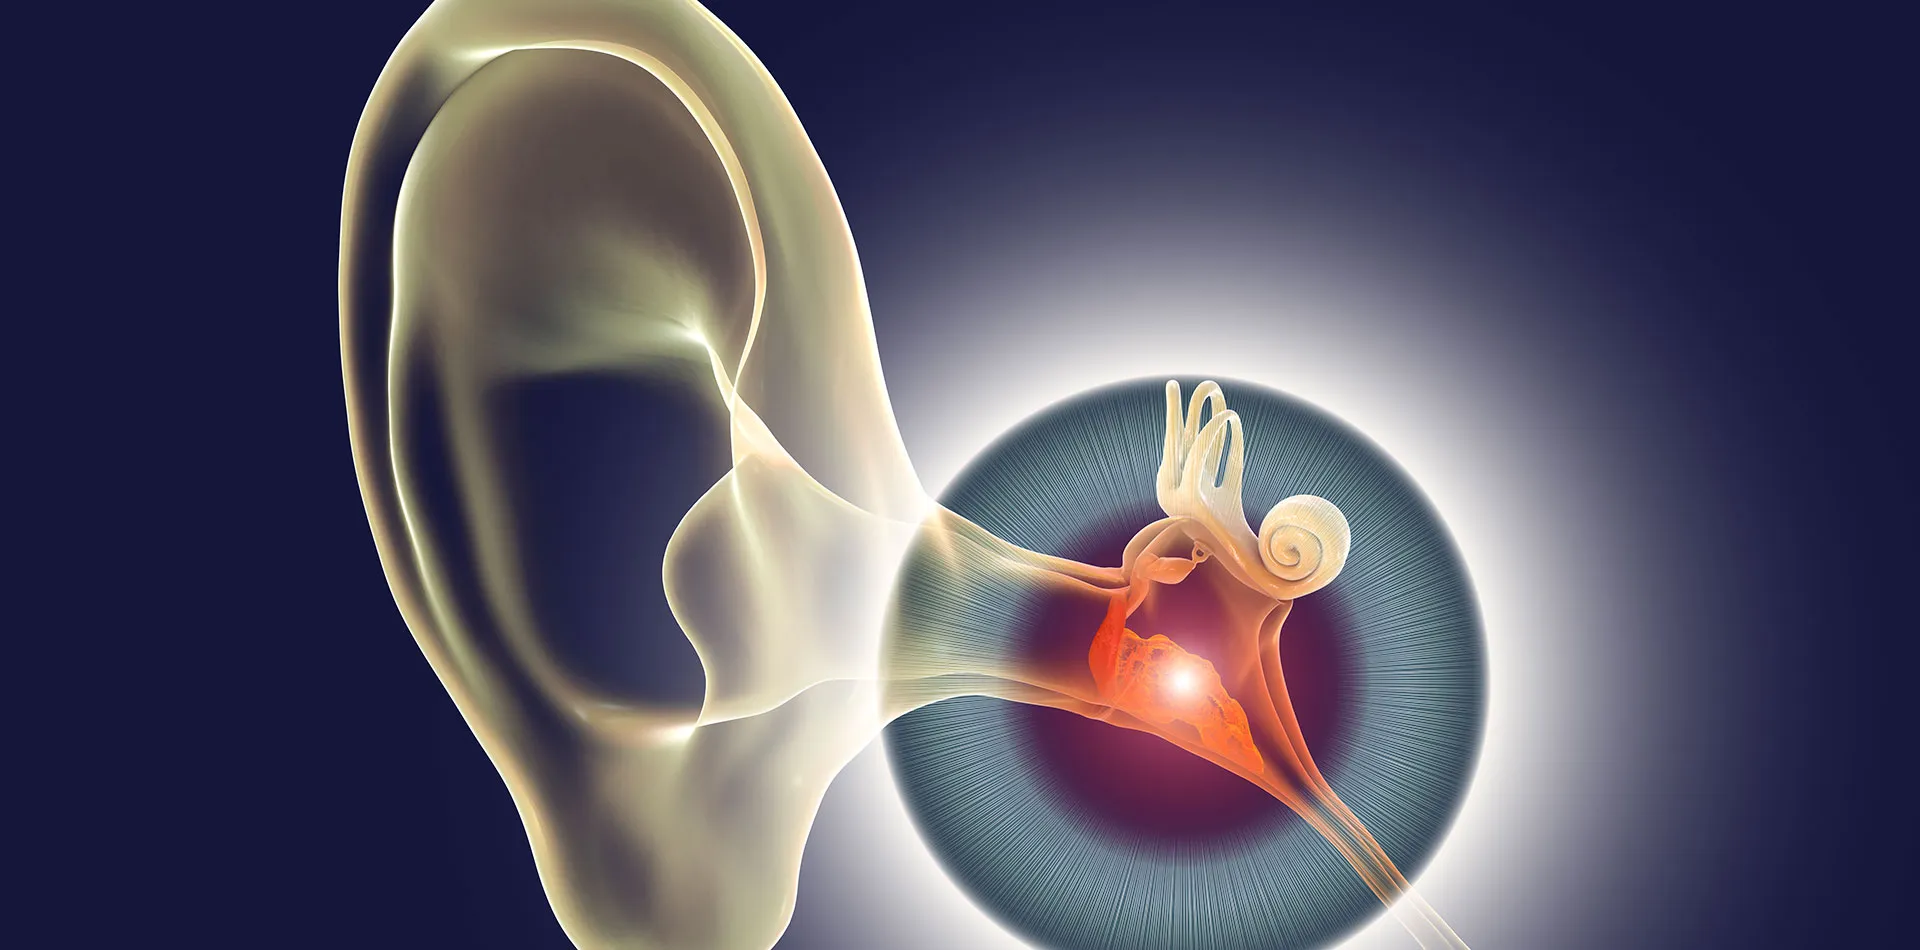 Read more about: Middle ear infection